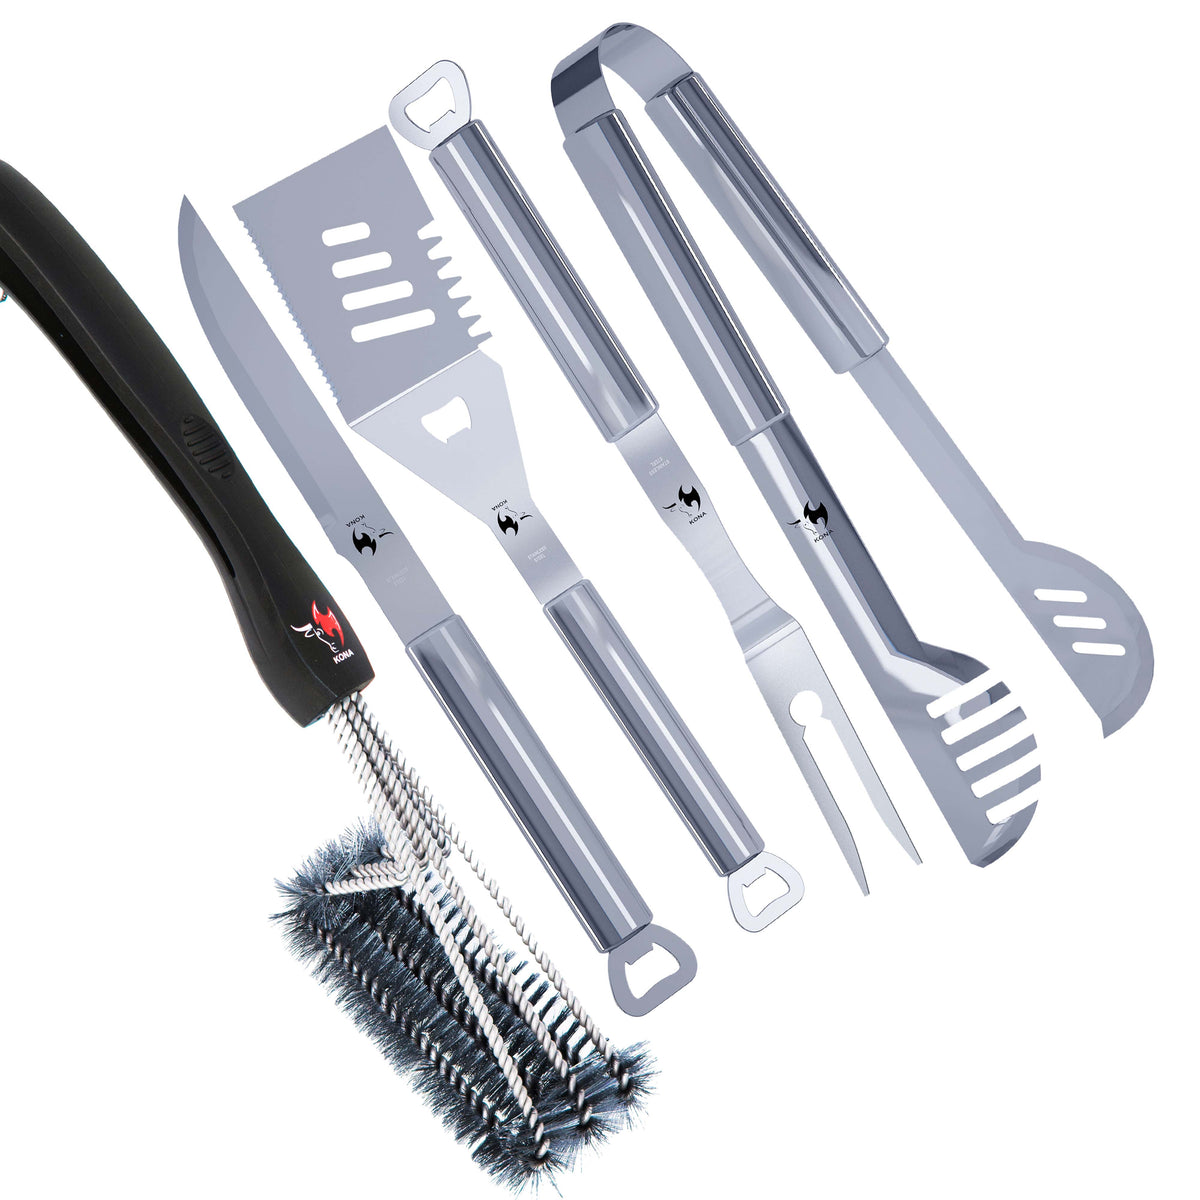 Kona 360 Clean Grill Brush 18 Best BBQ Grill Brush - Stainless Steel 3-in-1 Grill Cleaner Provides Effortless Cleaning Great